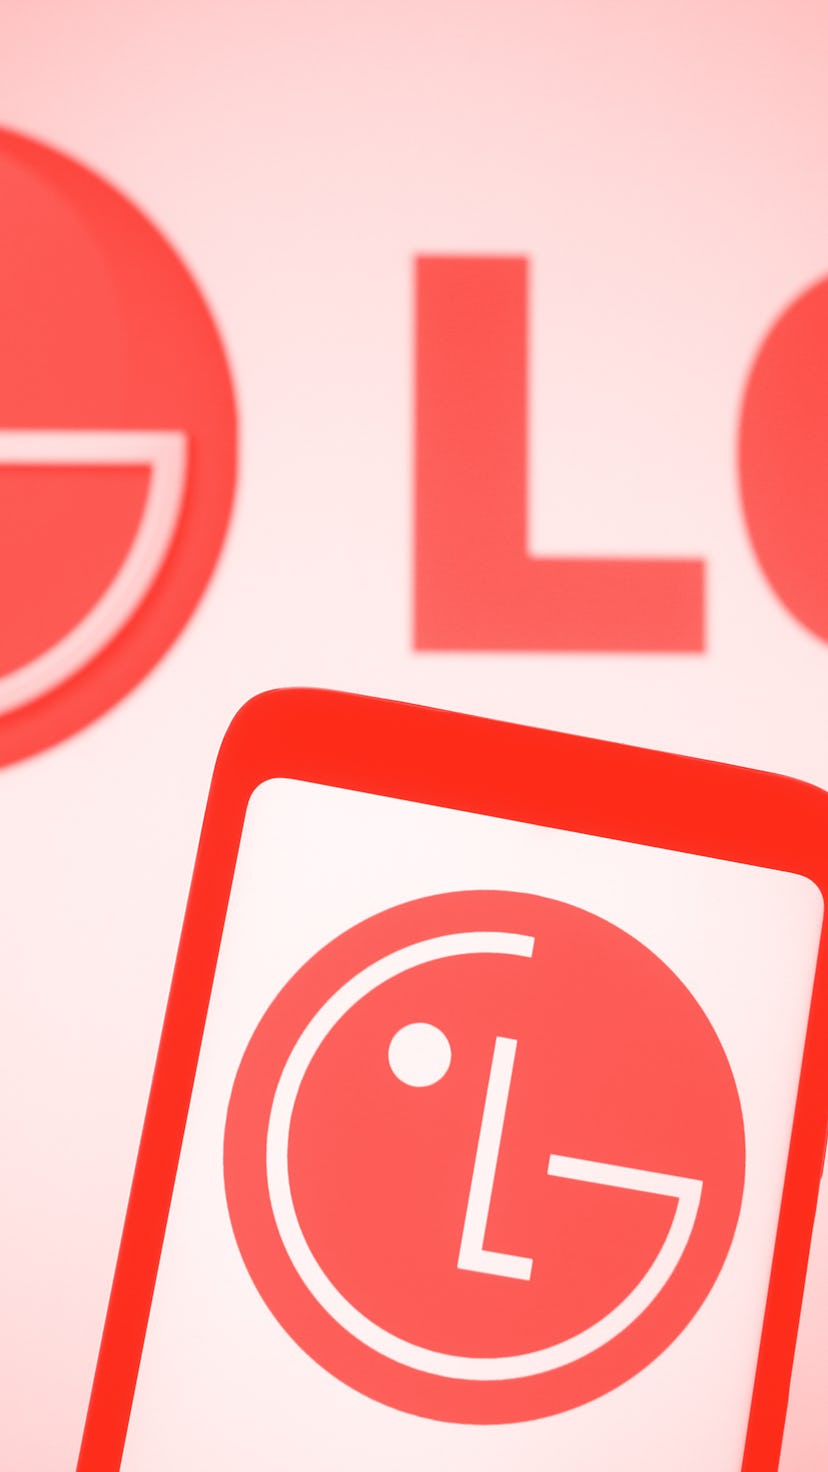 UKRAINE - 2021/03/15: In this photo illustration, LG logo seen displayed on a smartphone and a pc sc...